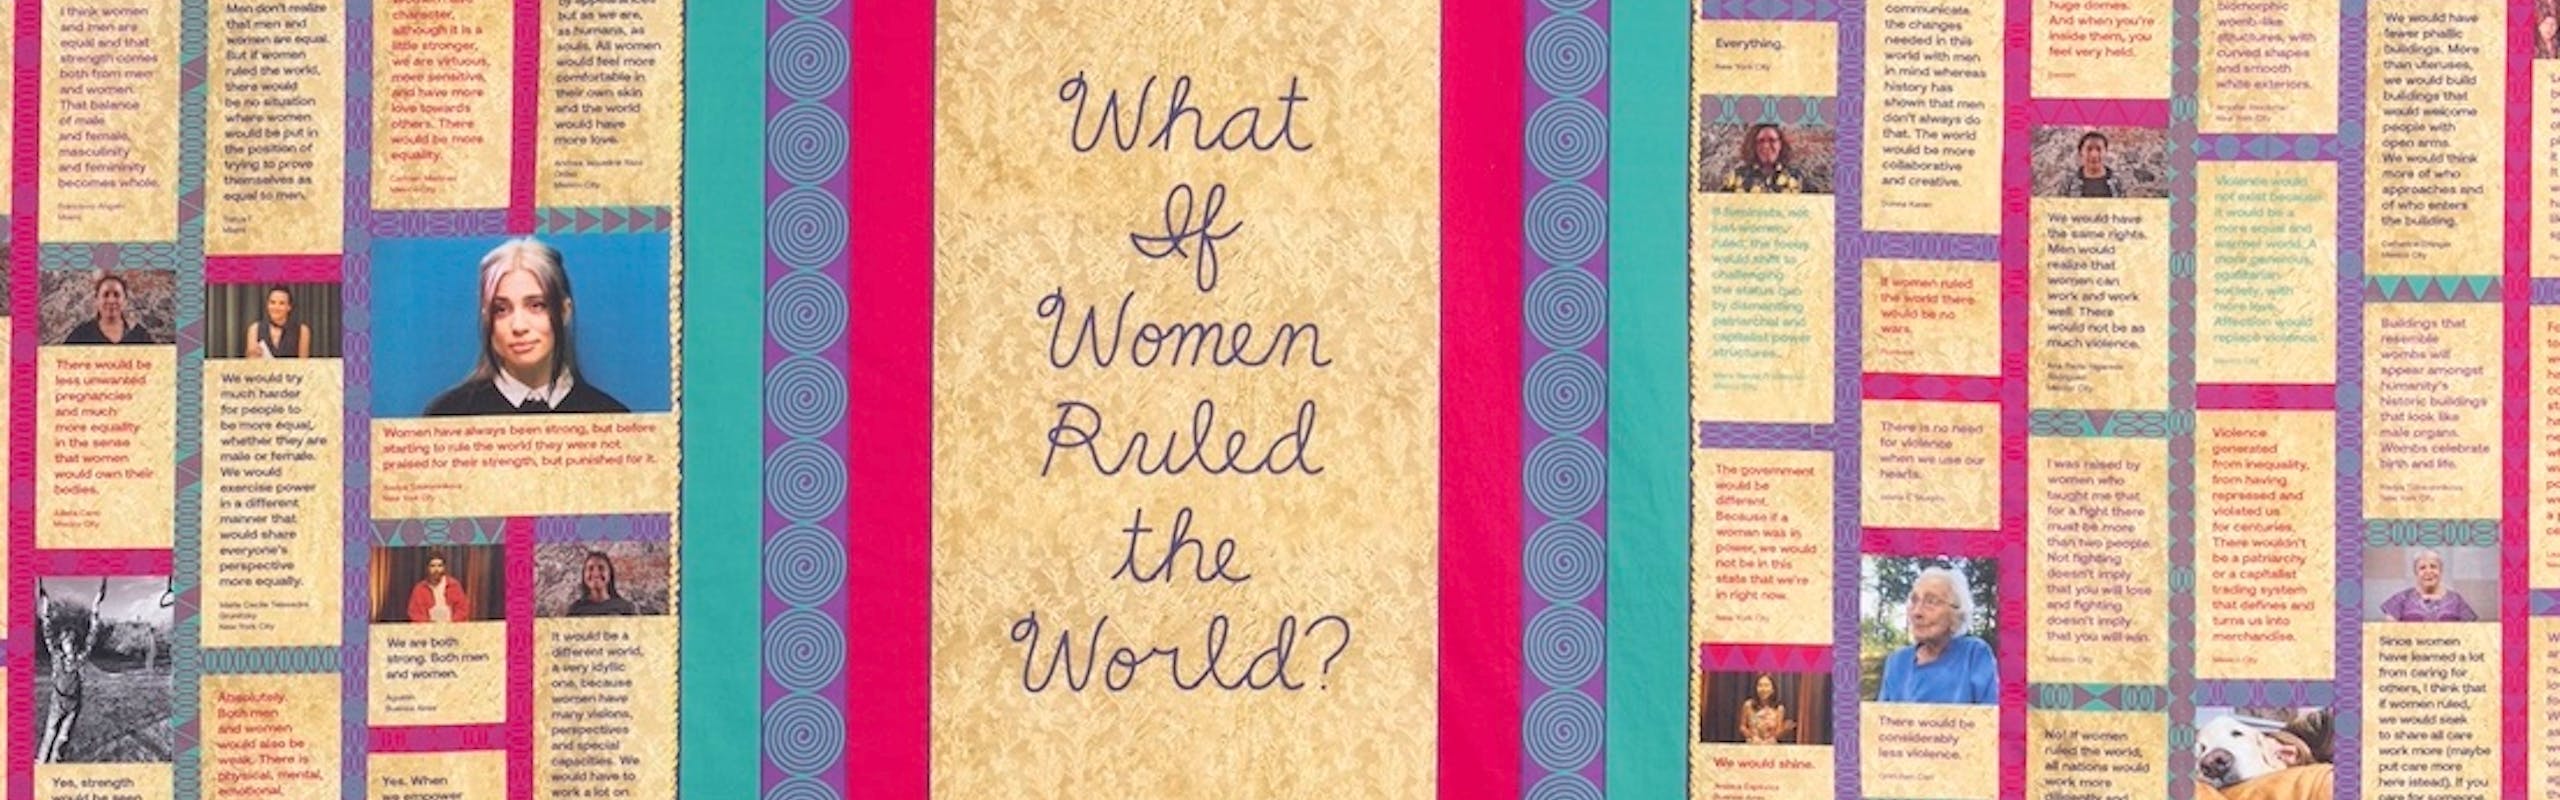 Judy Chicago's "What If Women Ruled the World" participatory quilt on view at the New Museum